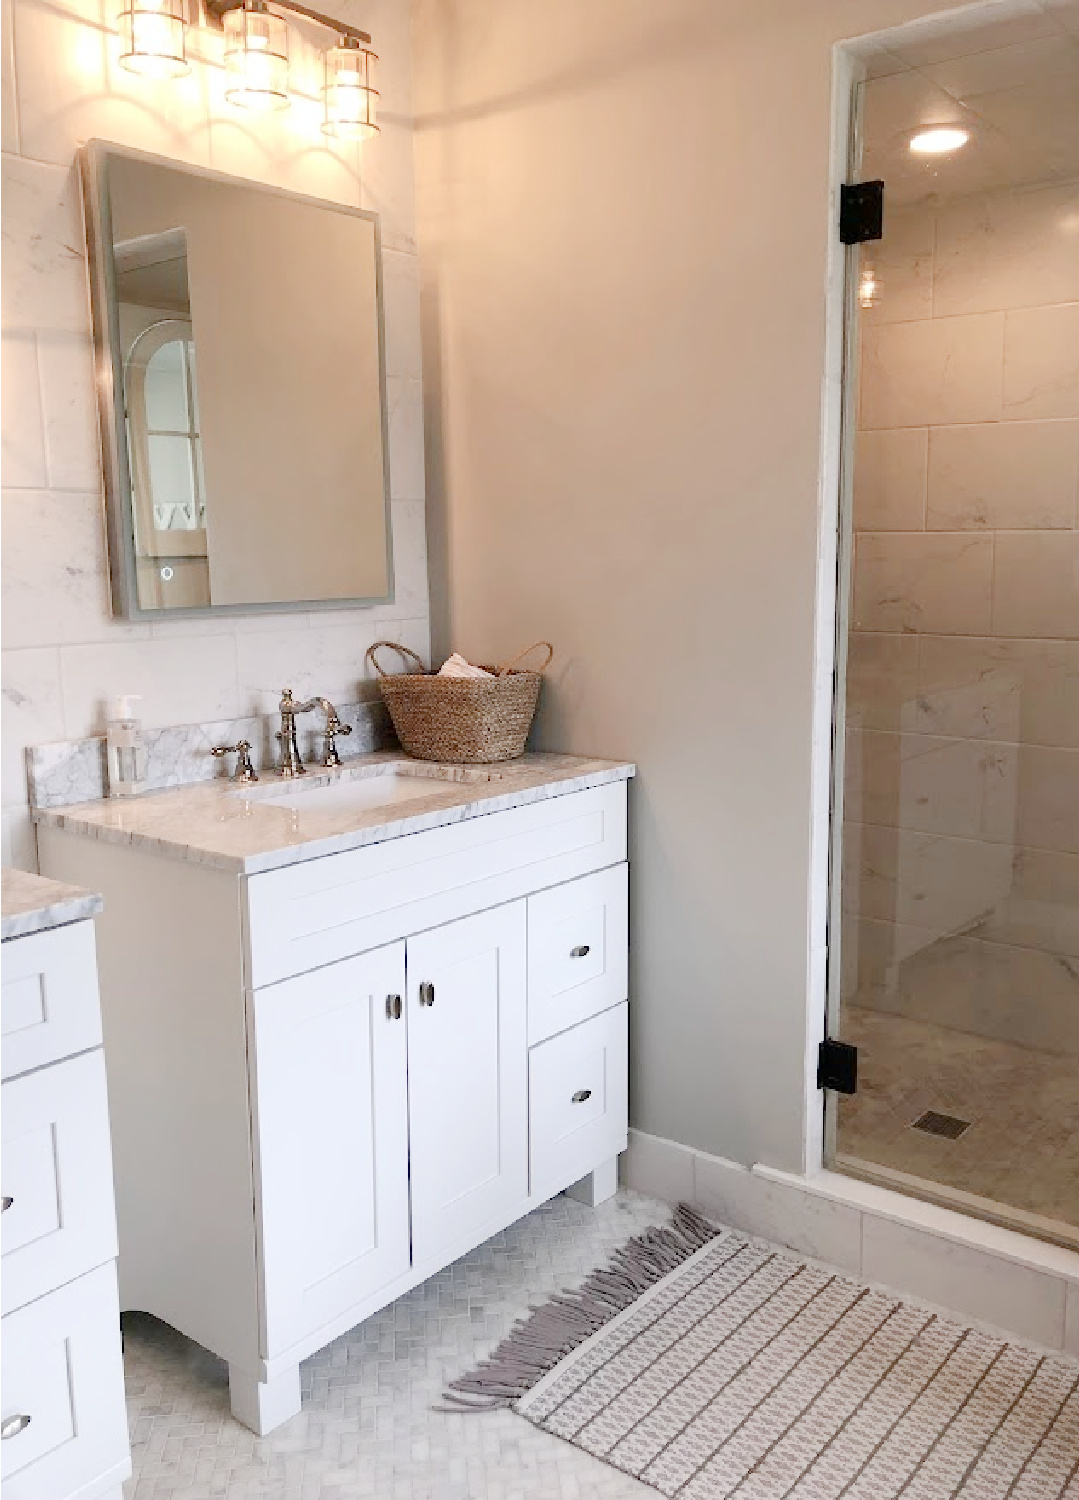 White Shaker style bath vanity with Edwardian style polished nickel faucet and modern mirrored medicine cabinet in our modern French renovated bath - Hello Lovely Studio.